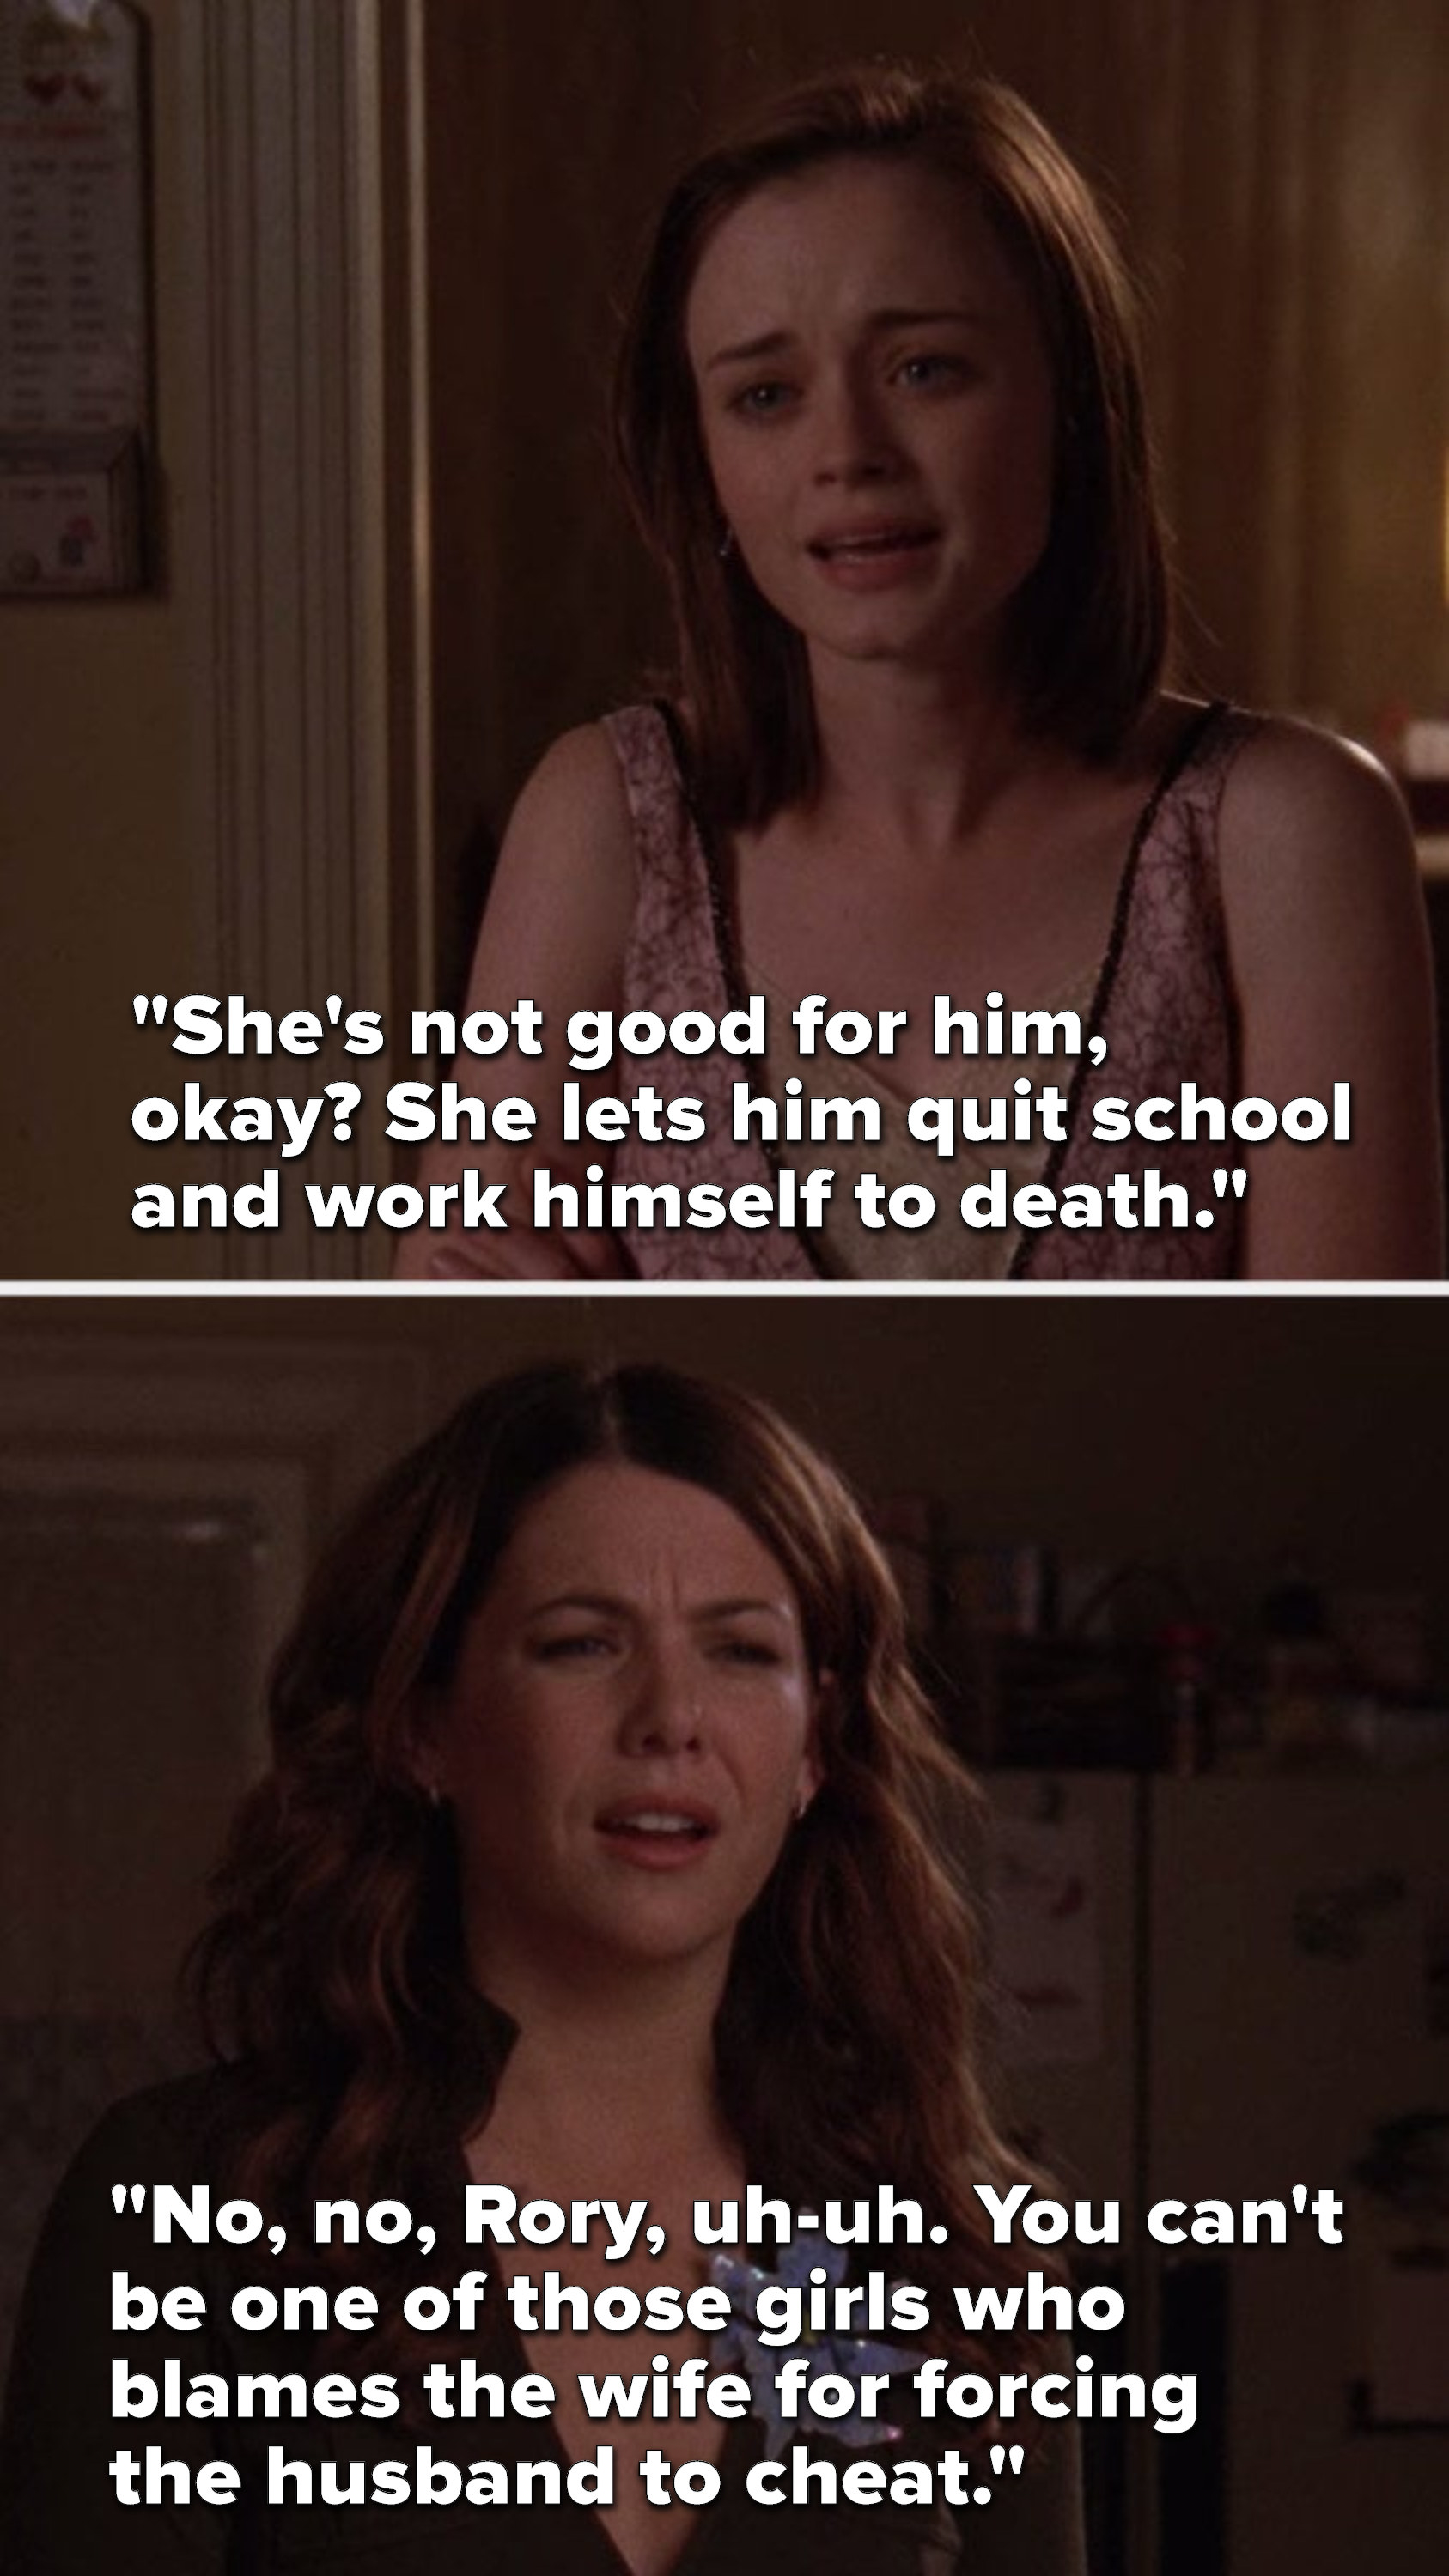 Rory says, &quot;She&#x27;s not good for him, okay? She lets him quit school and work himself to death,&quot; and Lorelai says, &quot;No, no, Rory, uh-uh. You can&#x27;t be one of those girls who blames the wife for forcing the husband to cheat.&quot;